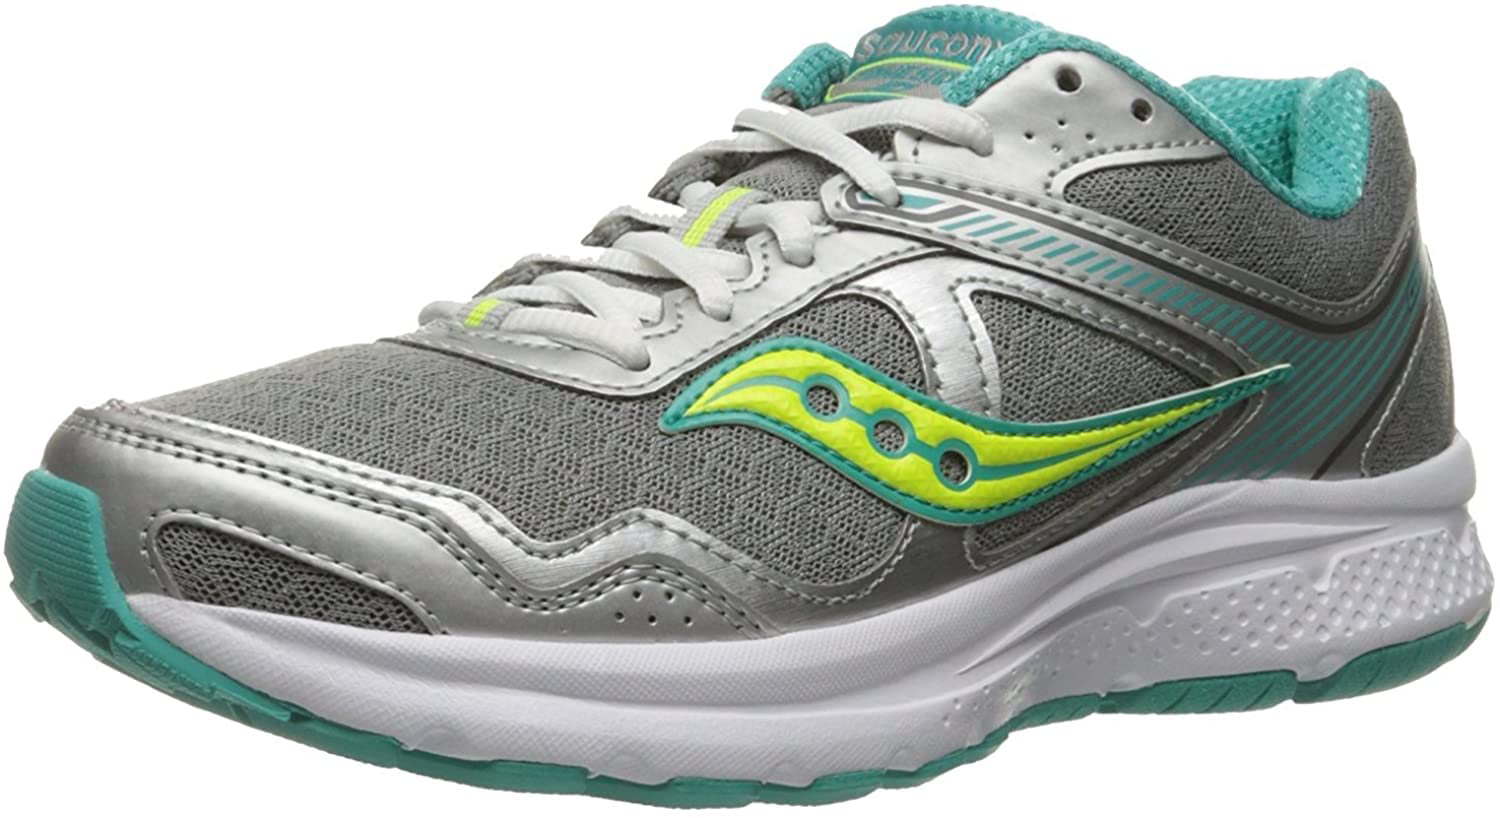 Saucony Cohesion 10 For Sale | lupon.gov.ph